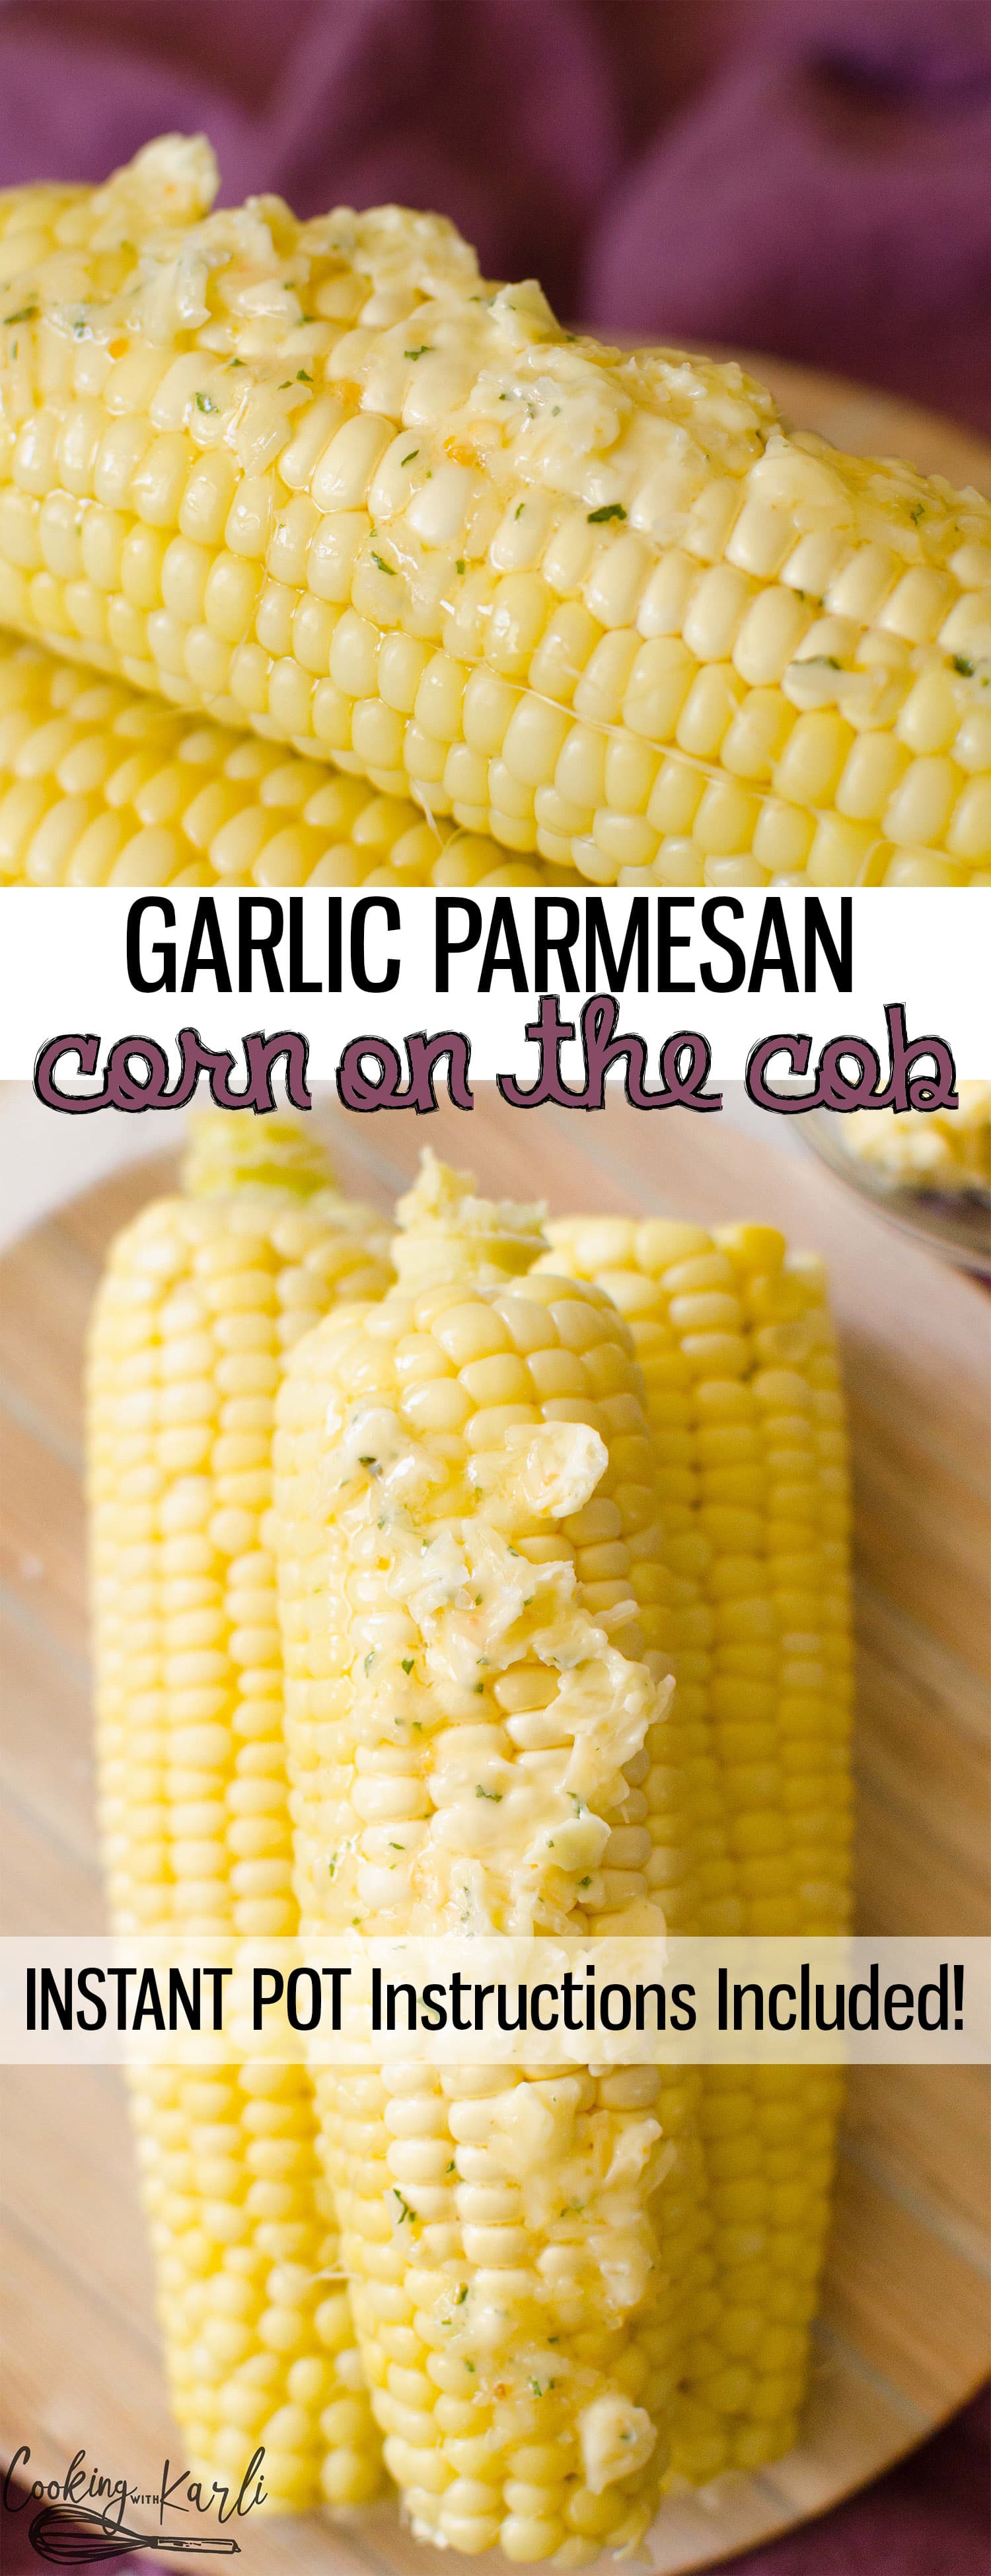 Garlic Parmesan Corn on the Cob is an easy way to take Corn on the Cob to the next level!! Once you taste the garlic and cheese butter on the corn, you'll never want corn any other way again! |Cooking with Karli| #corn #cob #garlic #parmesan #instantpot #recipe #easy 